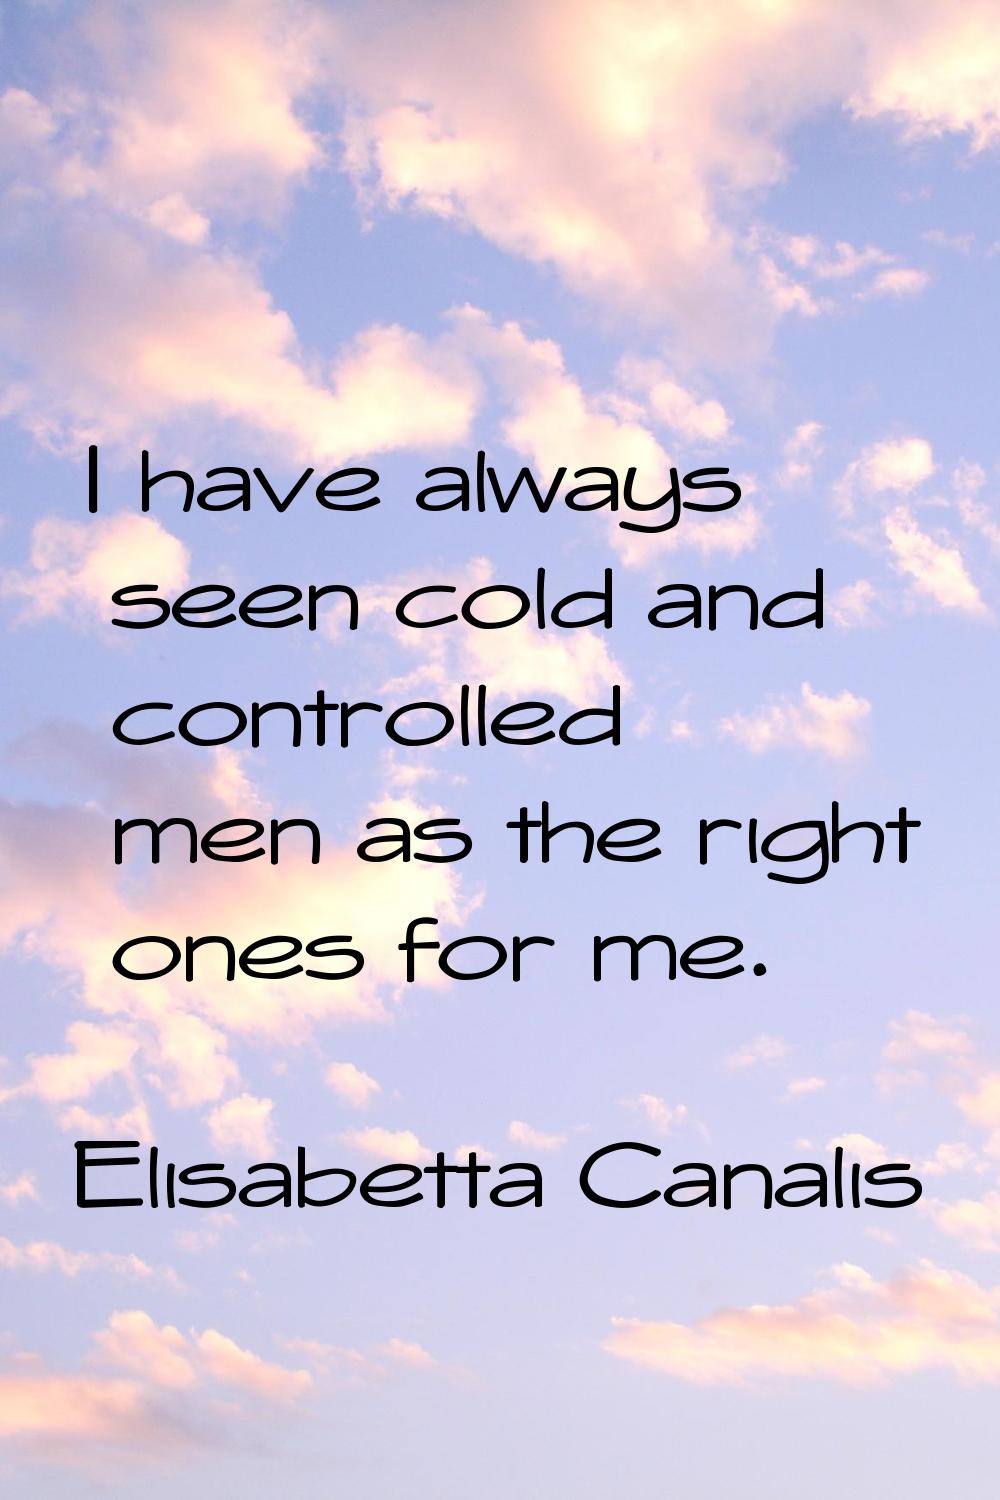 I have always seen cold and controlled men as the right ones for me.